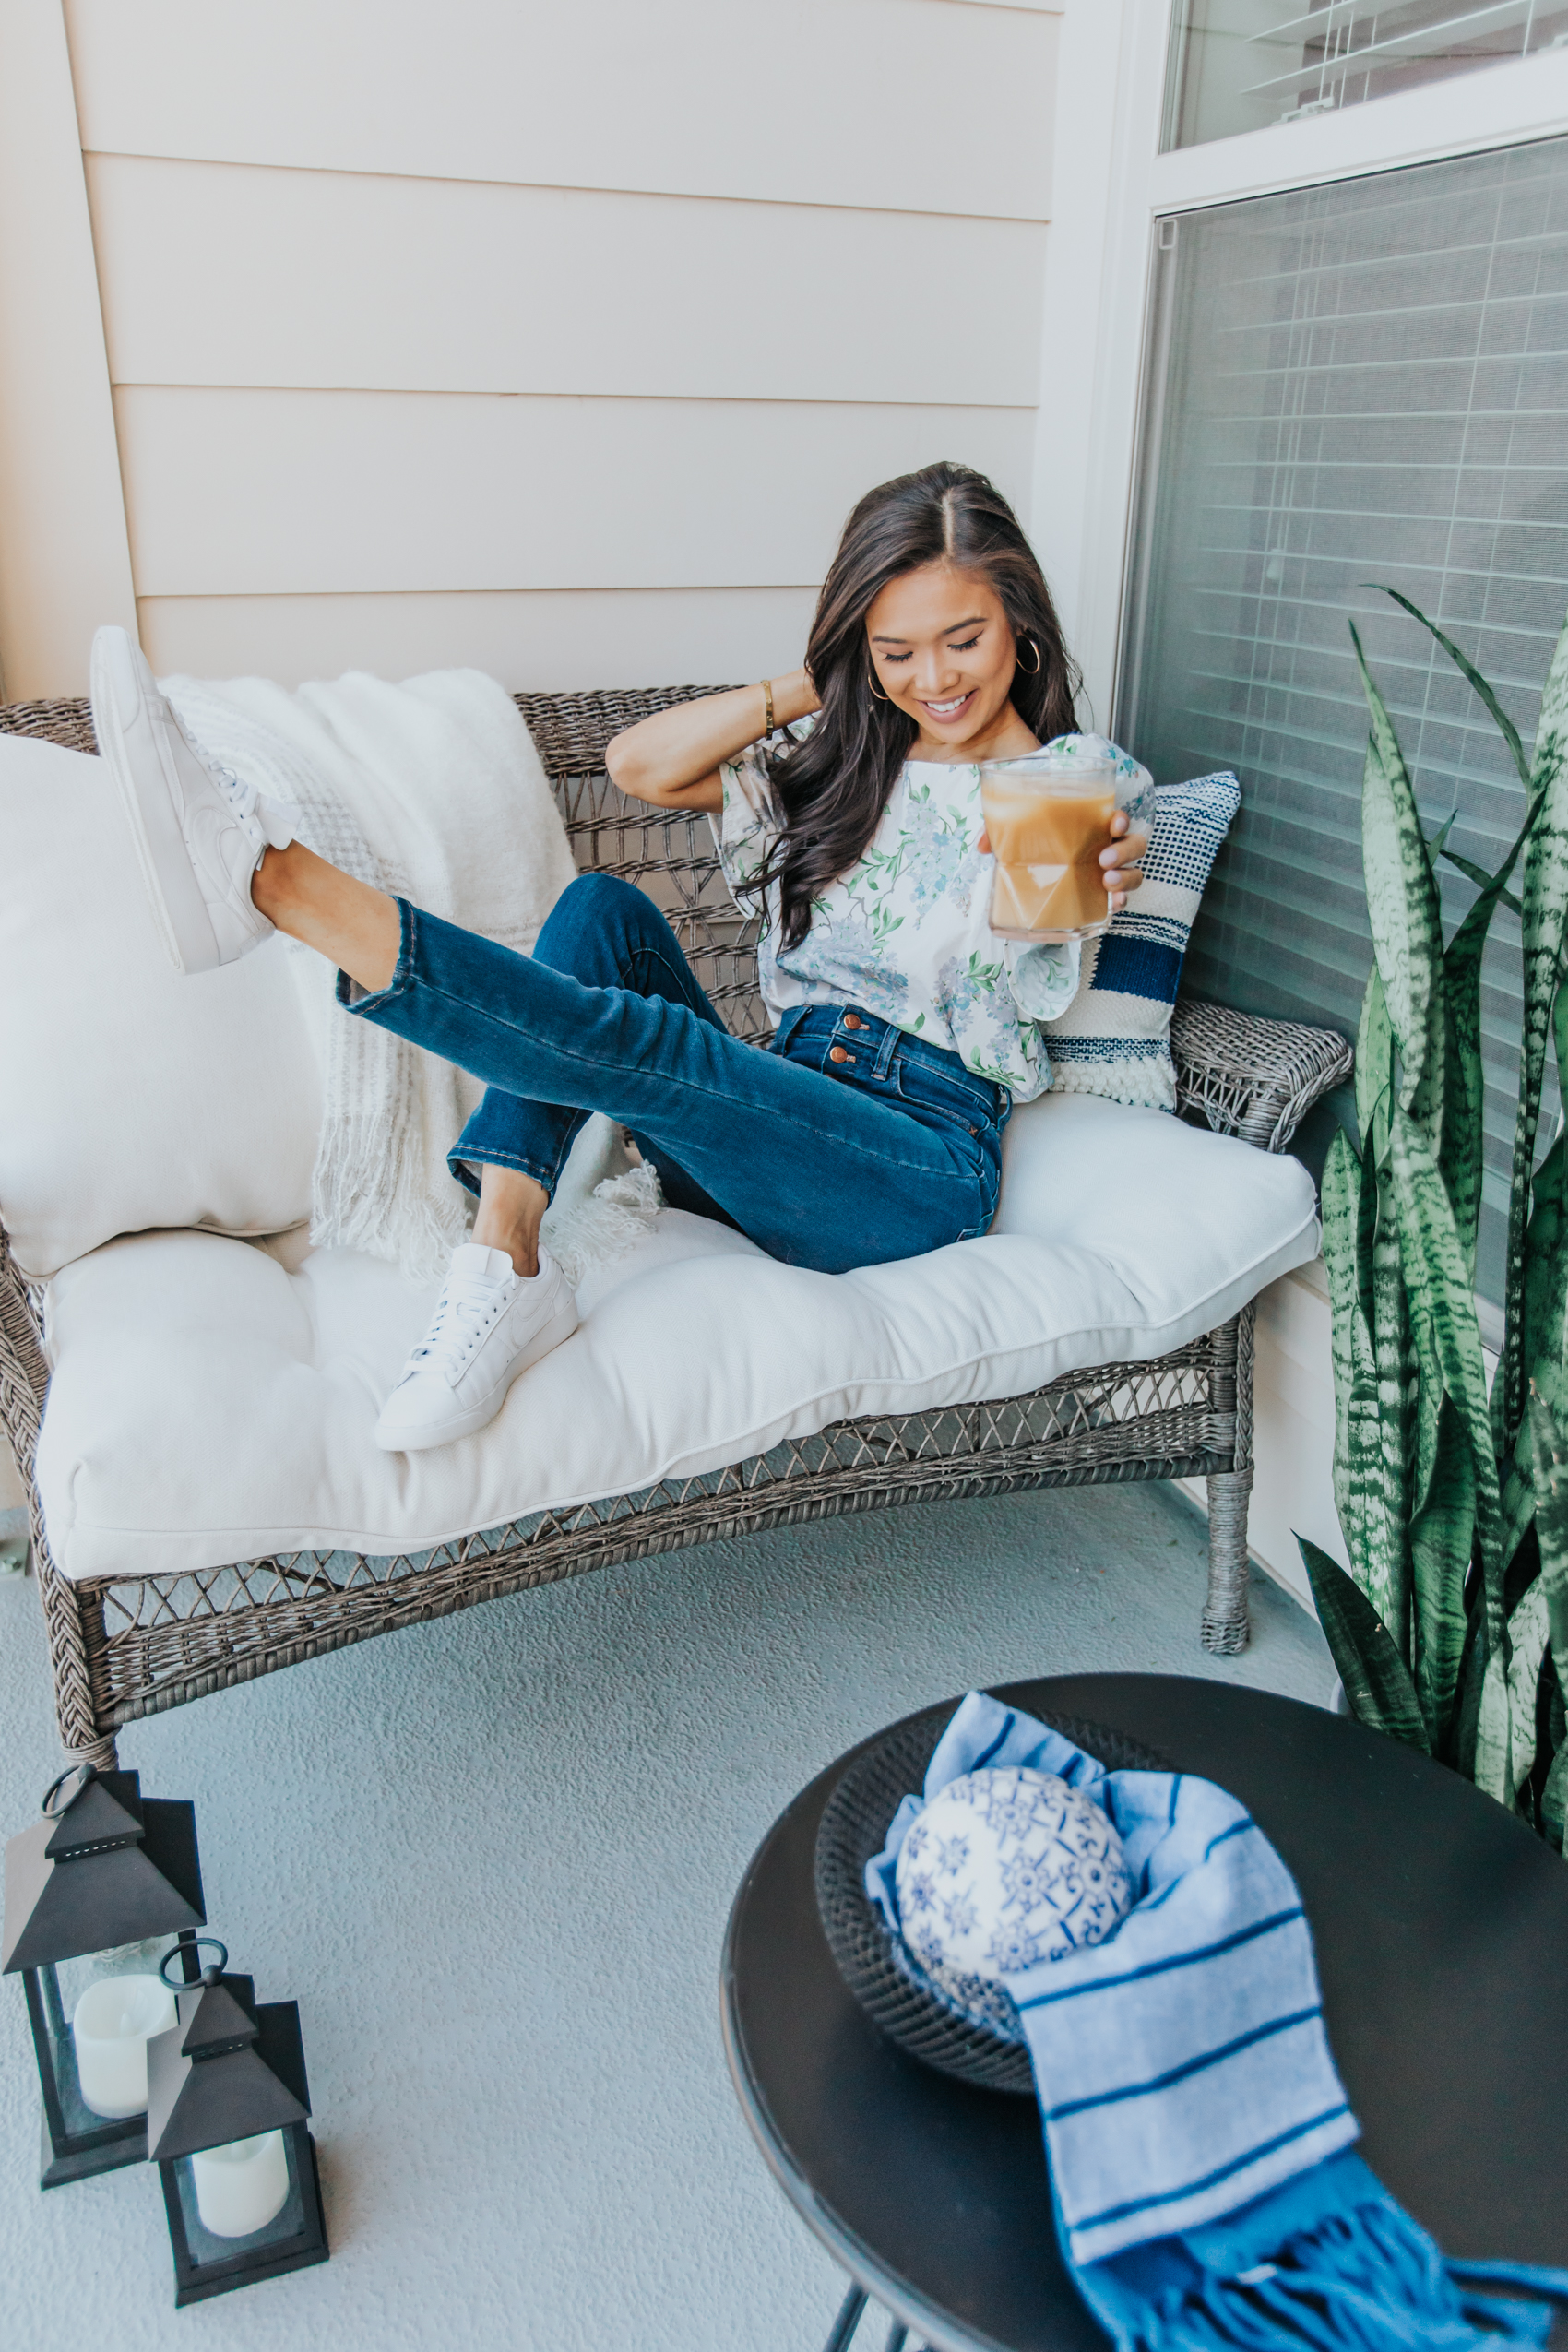 Blogger Hoang-Kim wearing a puff sleeve floral top in her small apartment patio space with a wicker sofa, cushions and lanterns